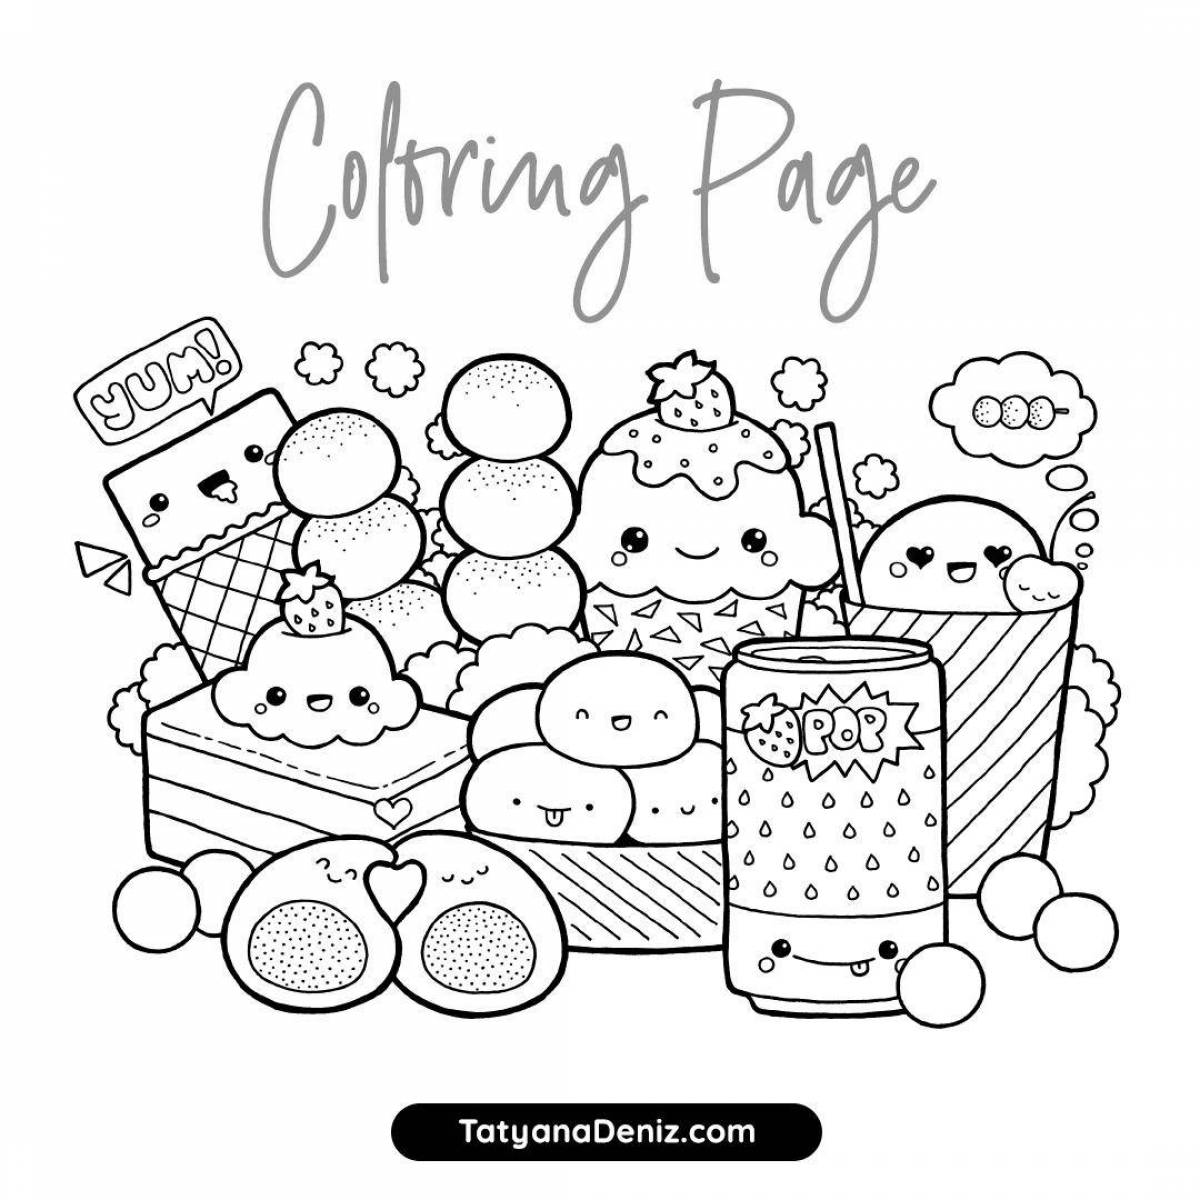 Lovely kawaii food coloring page